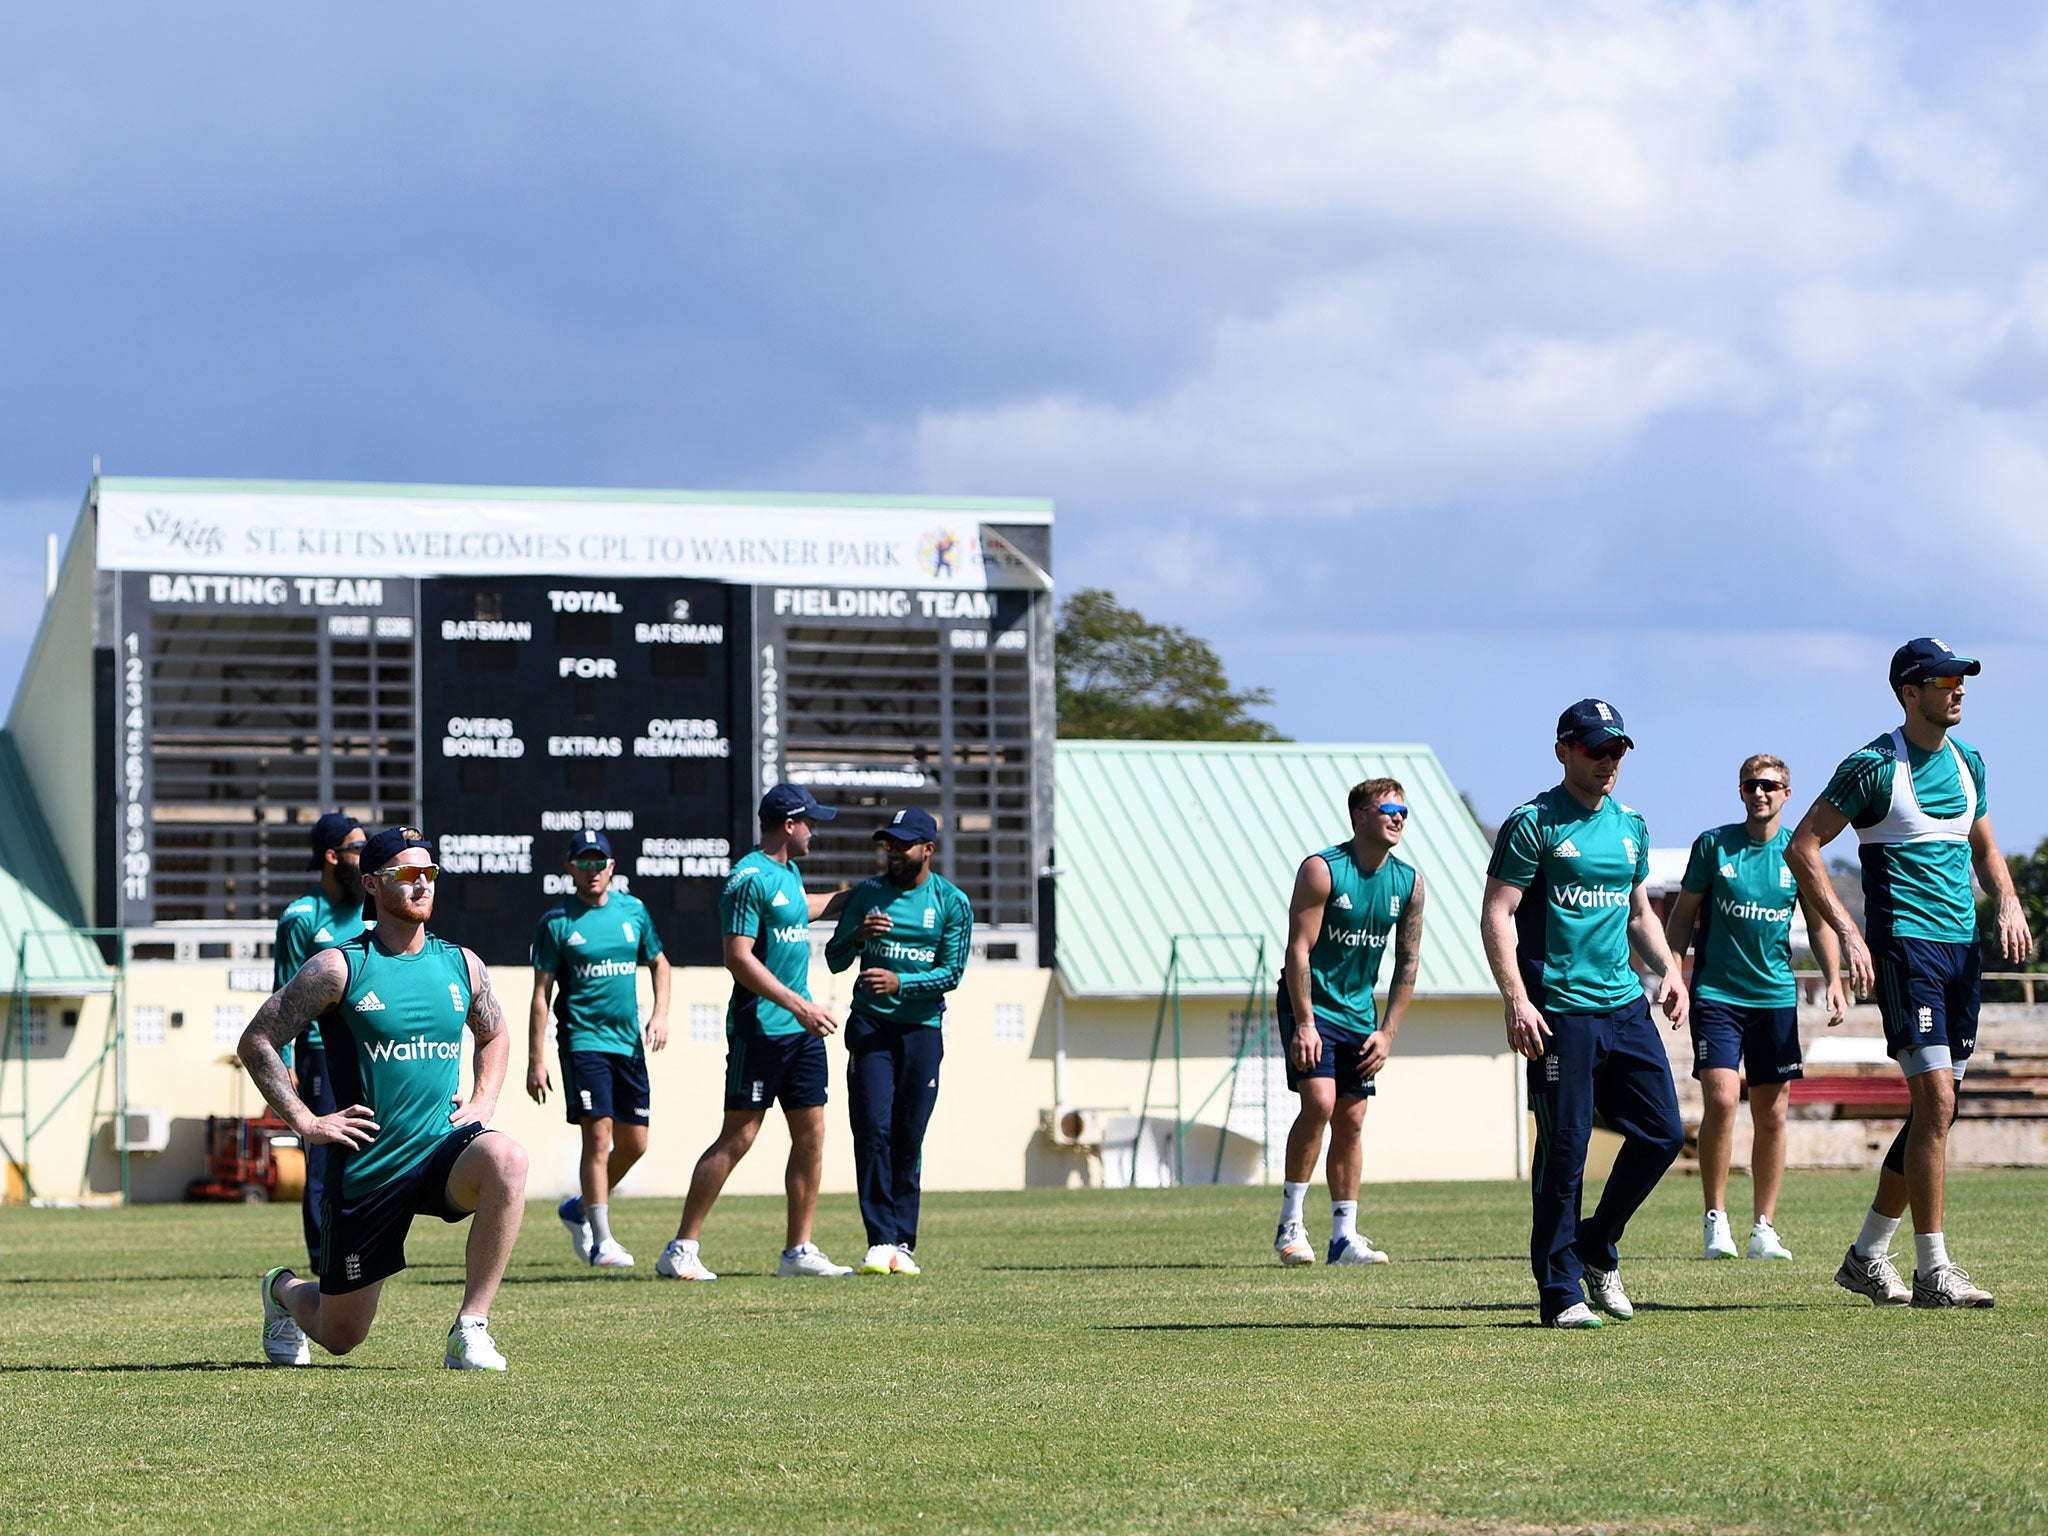 England's players warm up during a nets session at Warner Park on February 23, 2017